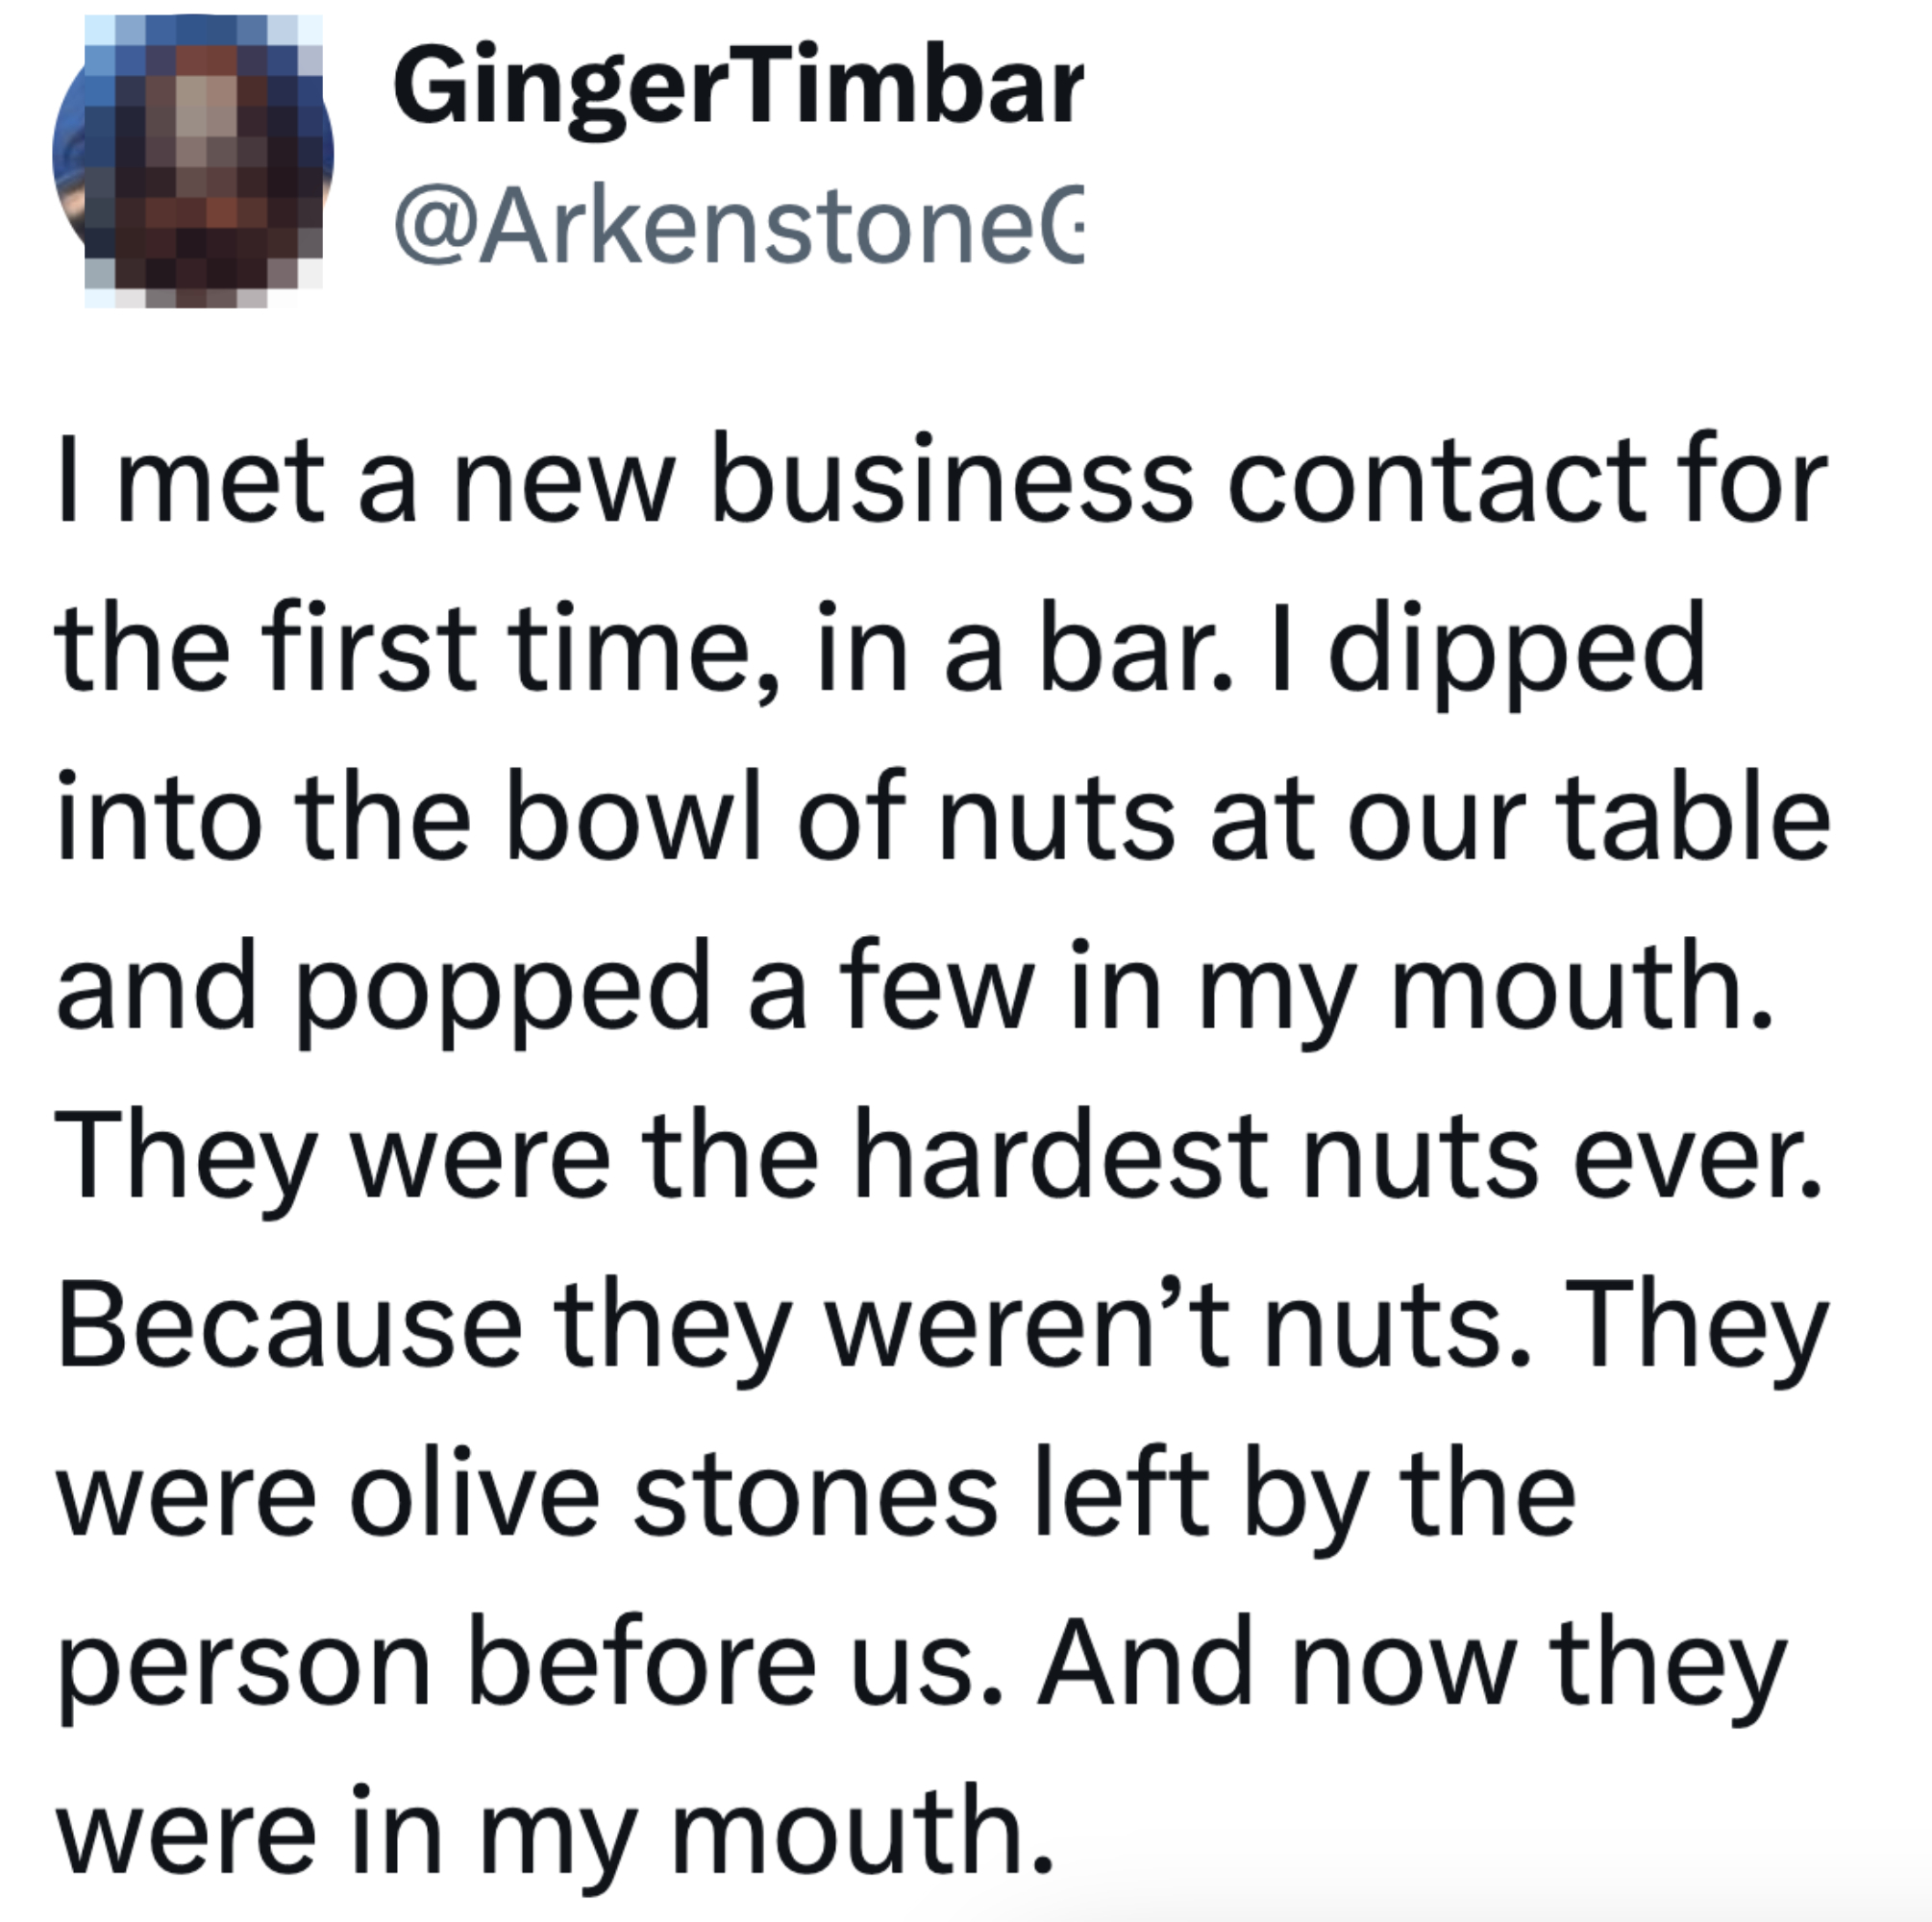 Tweet describes a humorous mix-up where the user mistook decorative stones for nuts at a bar